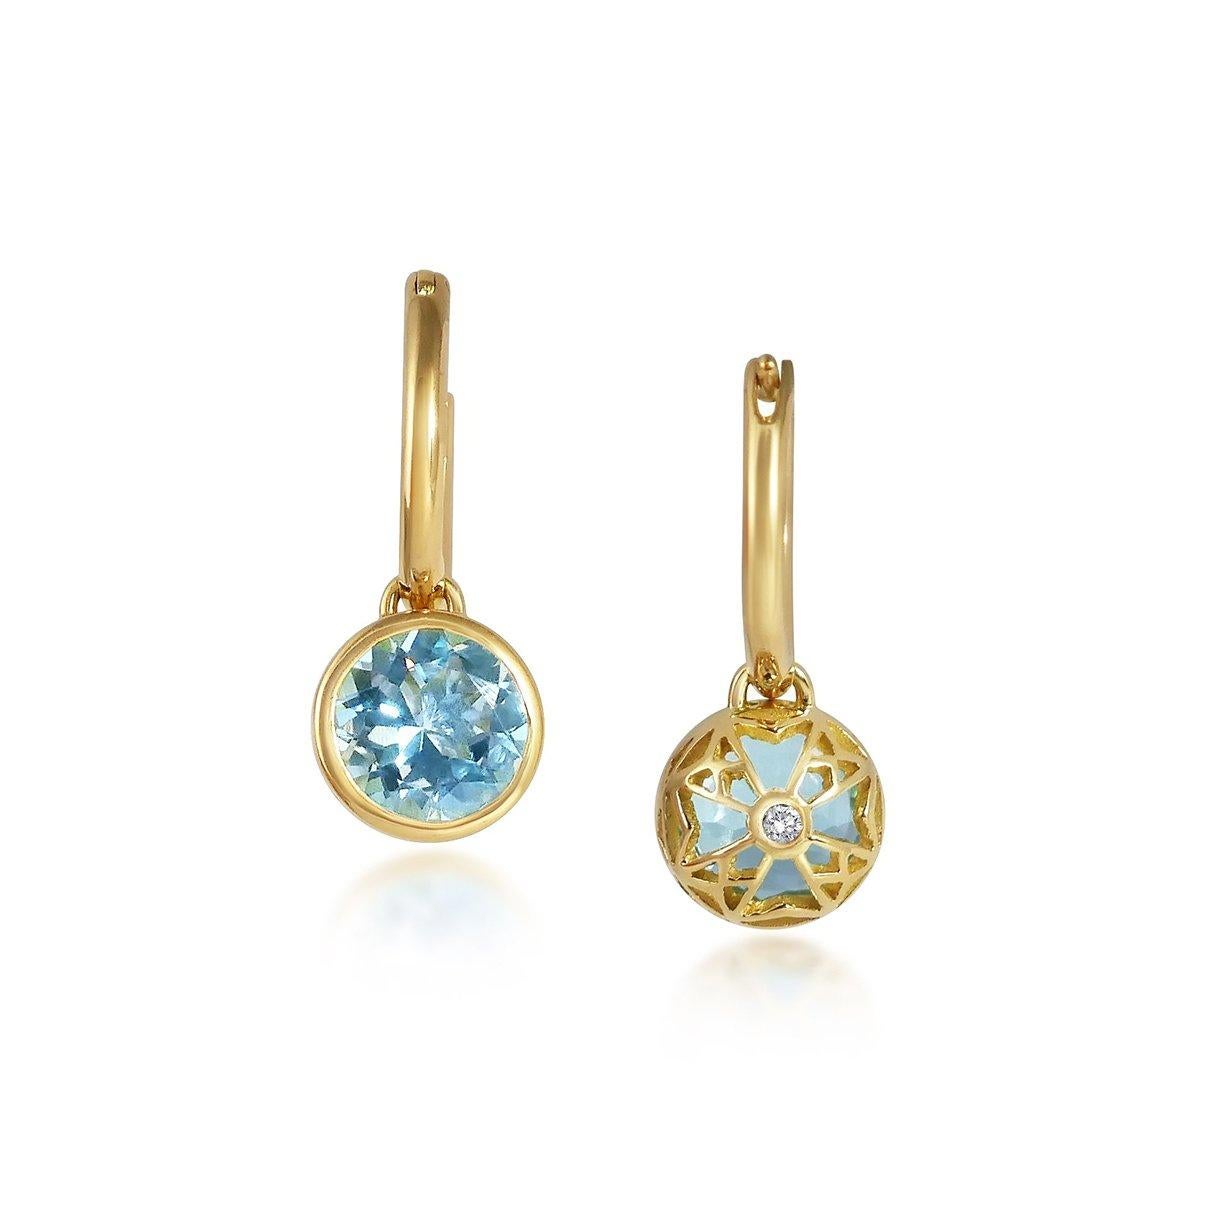 Handcrafted 2.70 Carats Aquamarine 18 Karat Yellow Gold Drop Earrings. The 8mm natural stones are set in our iconic hand pierced gold lace to let the light through. Our precious and fine stones on our dangling earrings are highlighted by a diamond